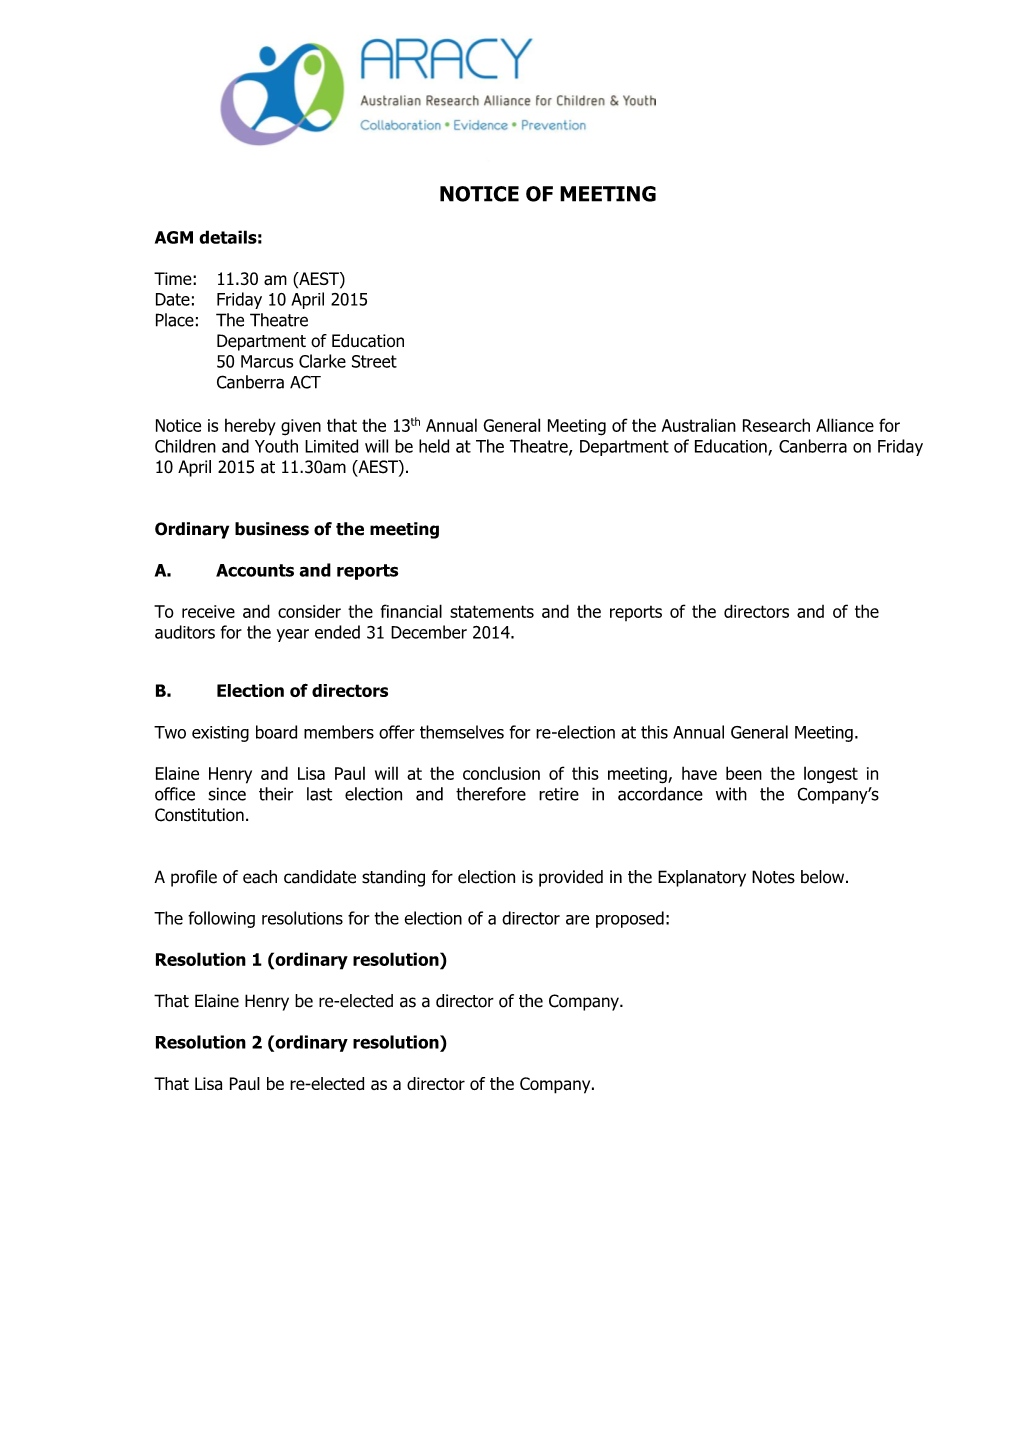 AGM 2015 Notice of Meeting